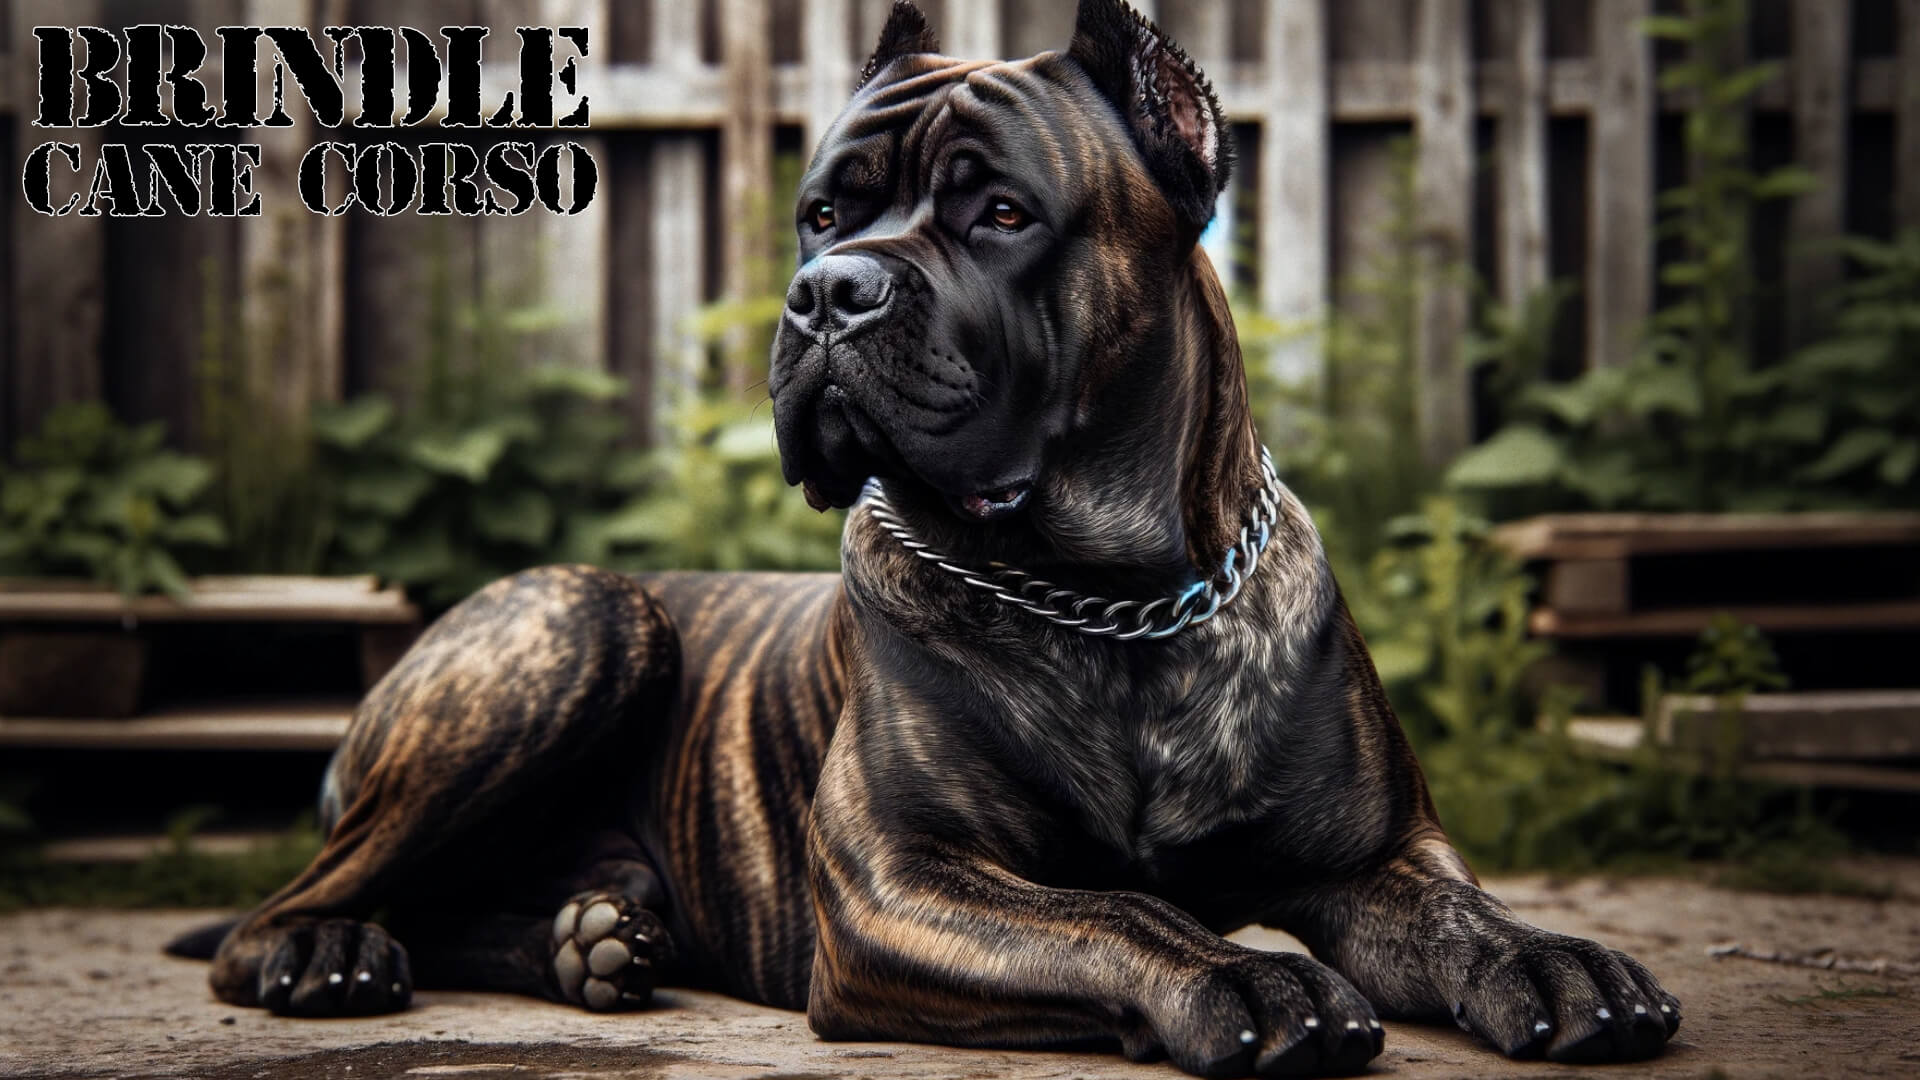 Cane Corso lying down outdoors with a muscular build and a brindle coat featuring dark and light brown stripes.